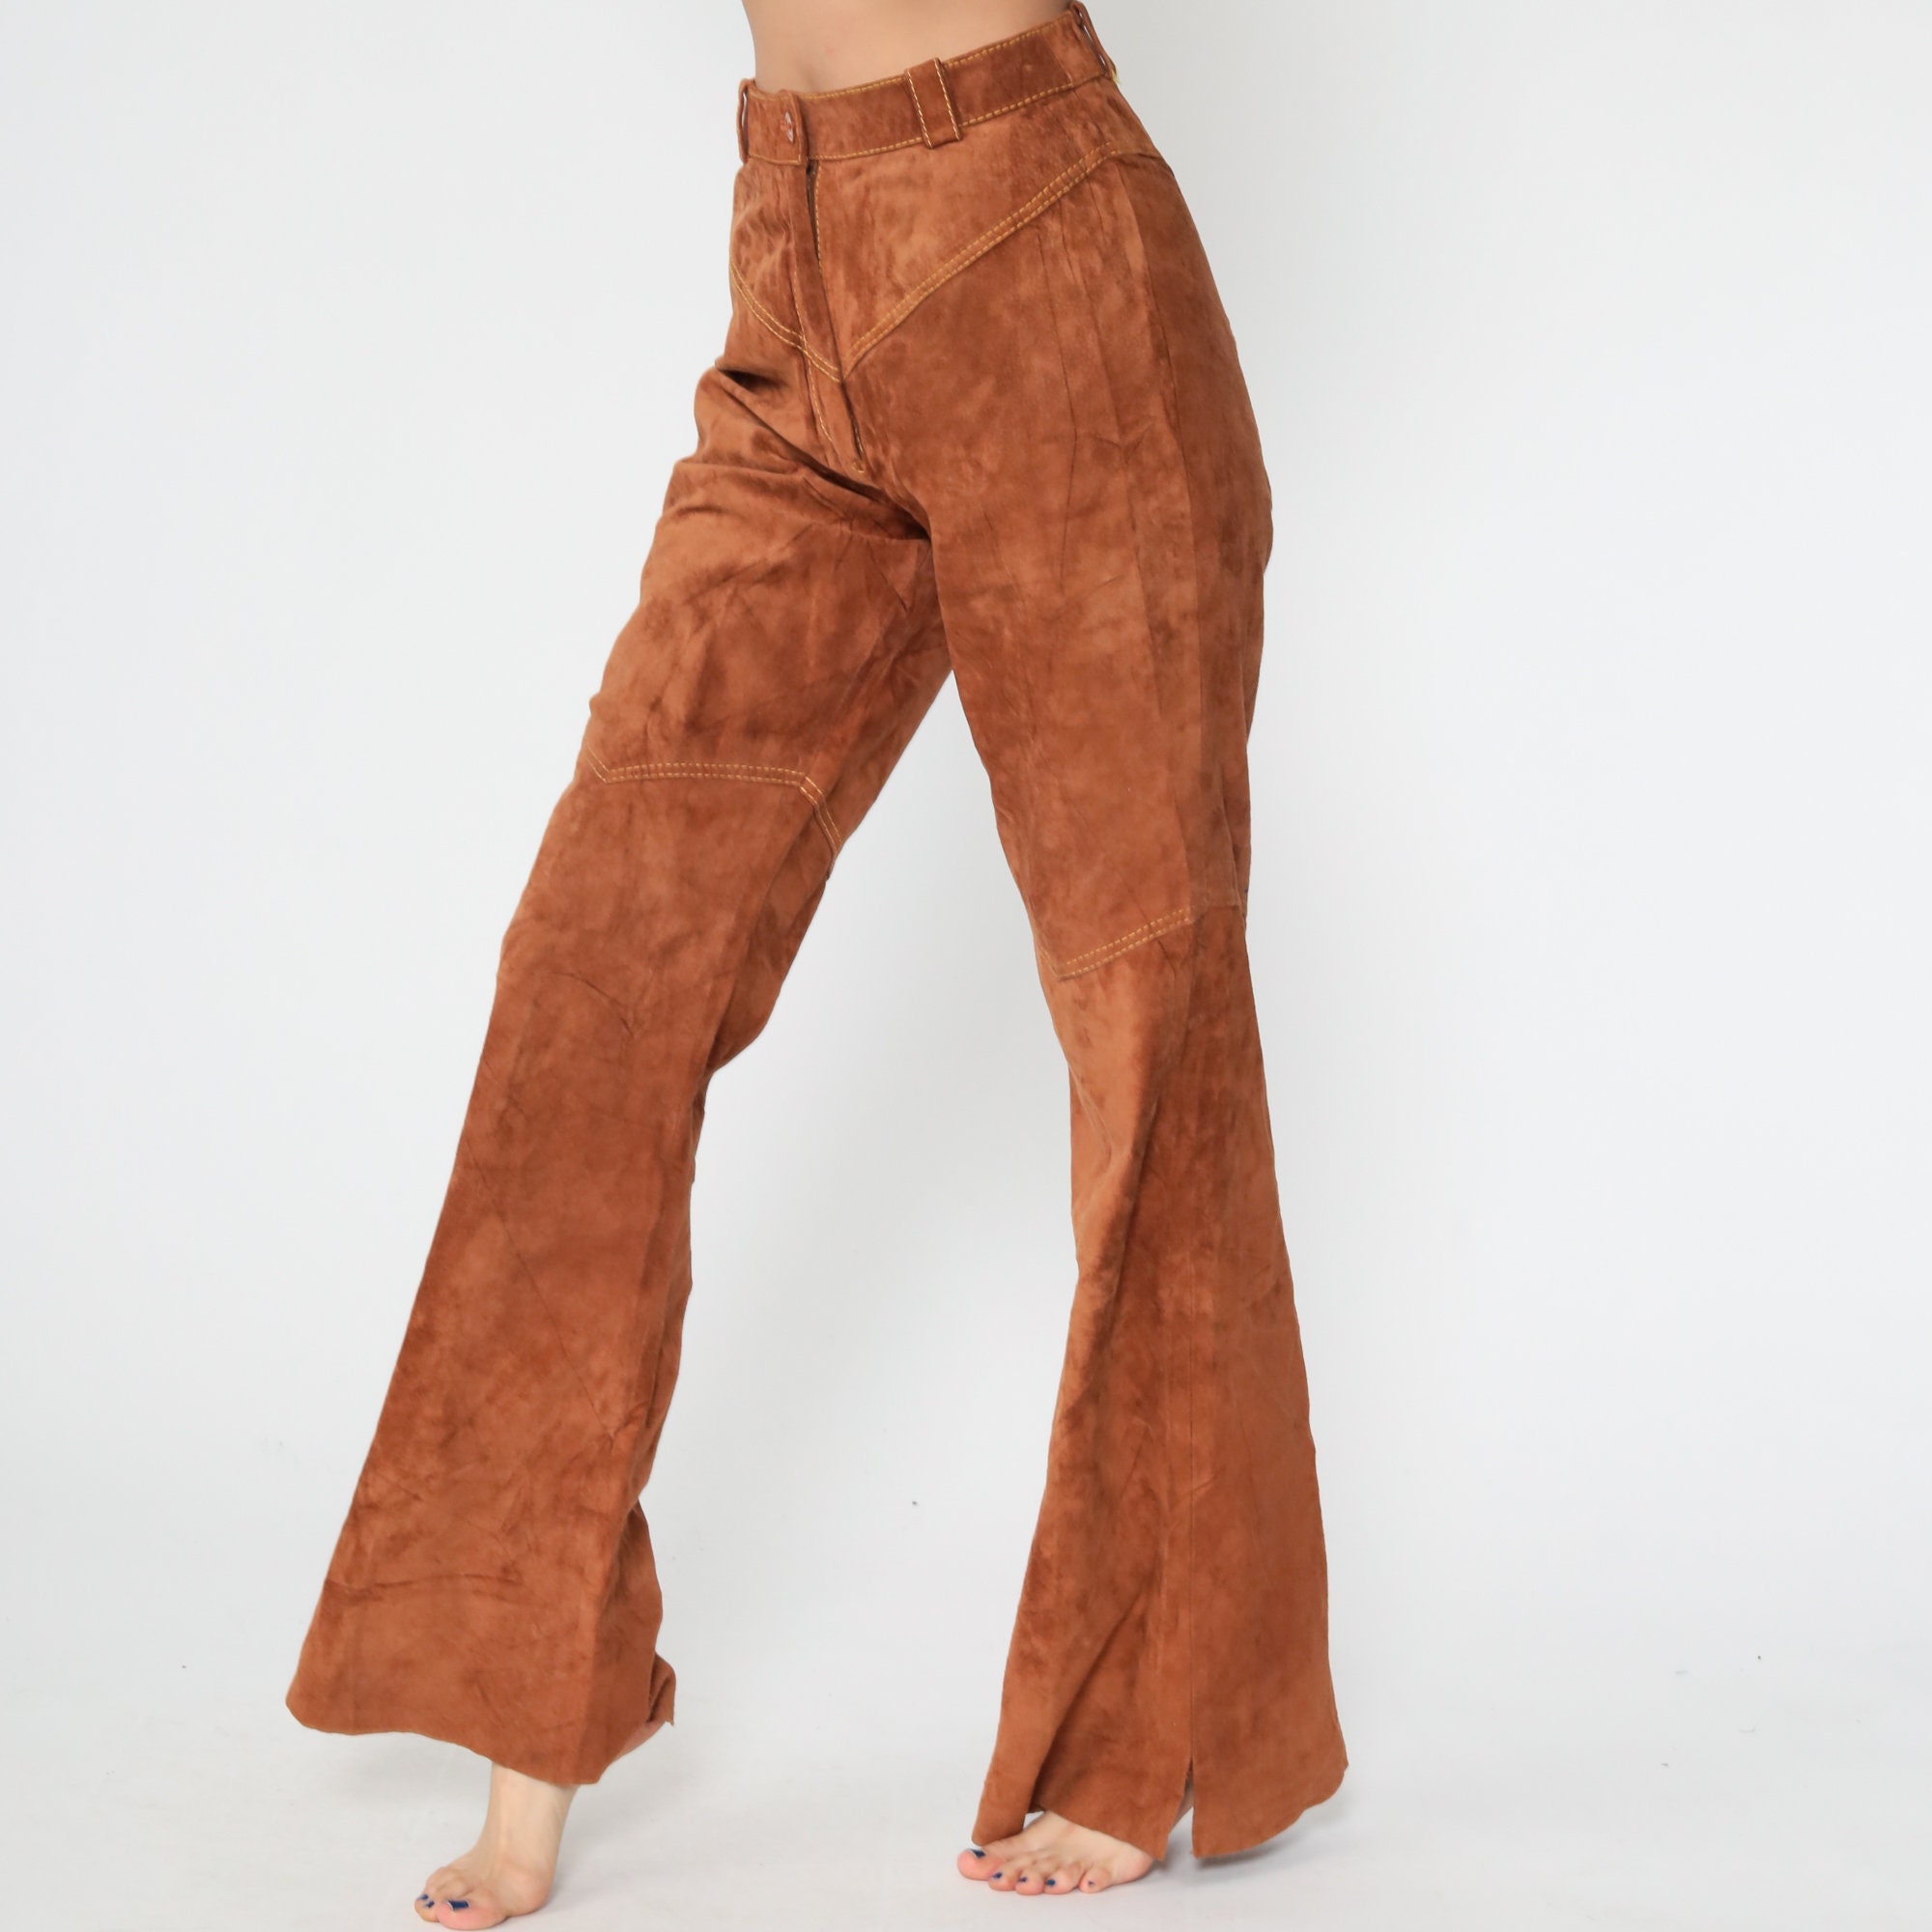 Leather Bell Bottom Pants 70s SUEDE Pants Brown Boho Hippie Pants High ...